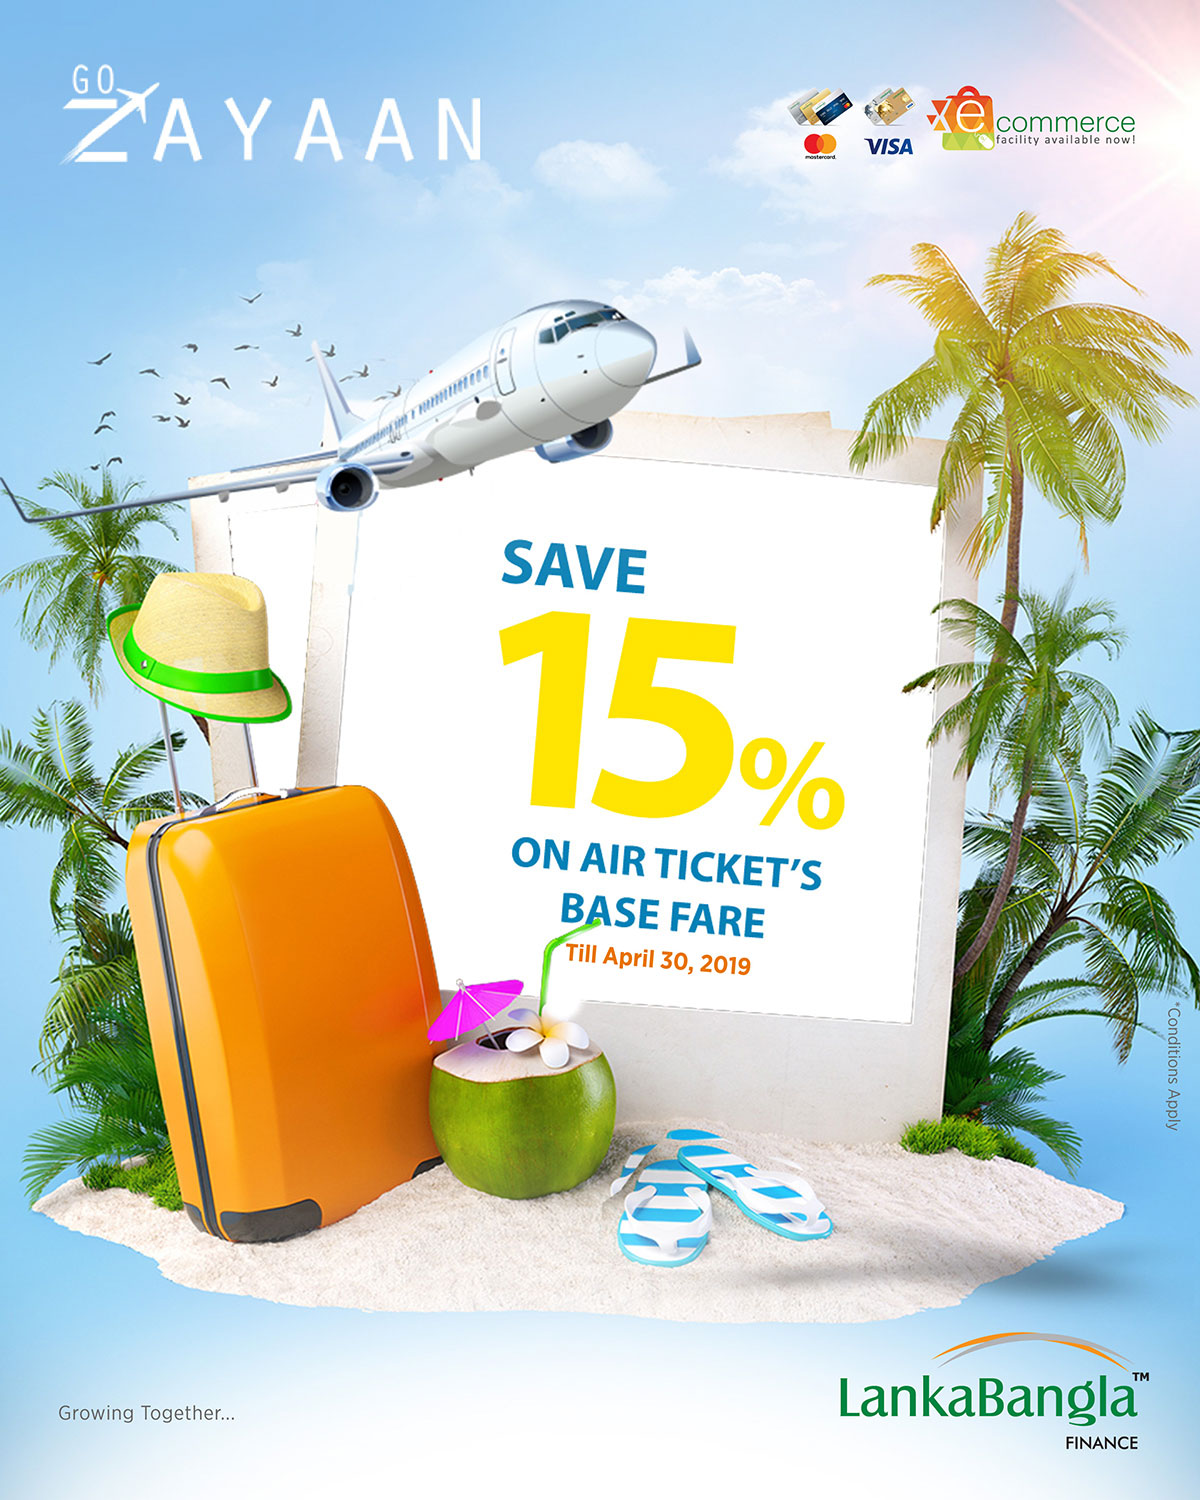 Save 15% on Air Ticket’s Base Fare